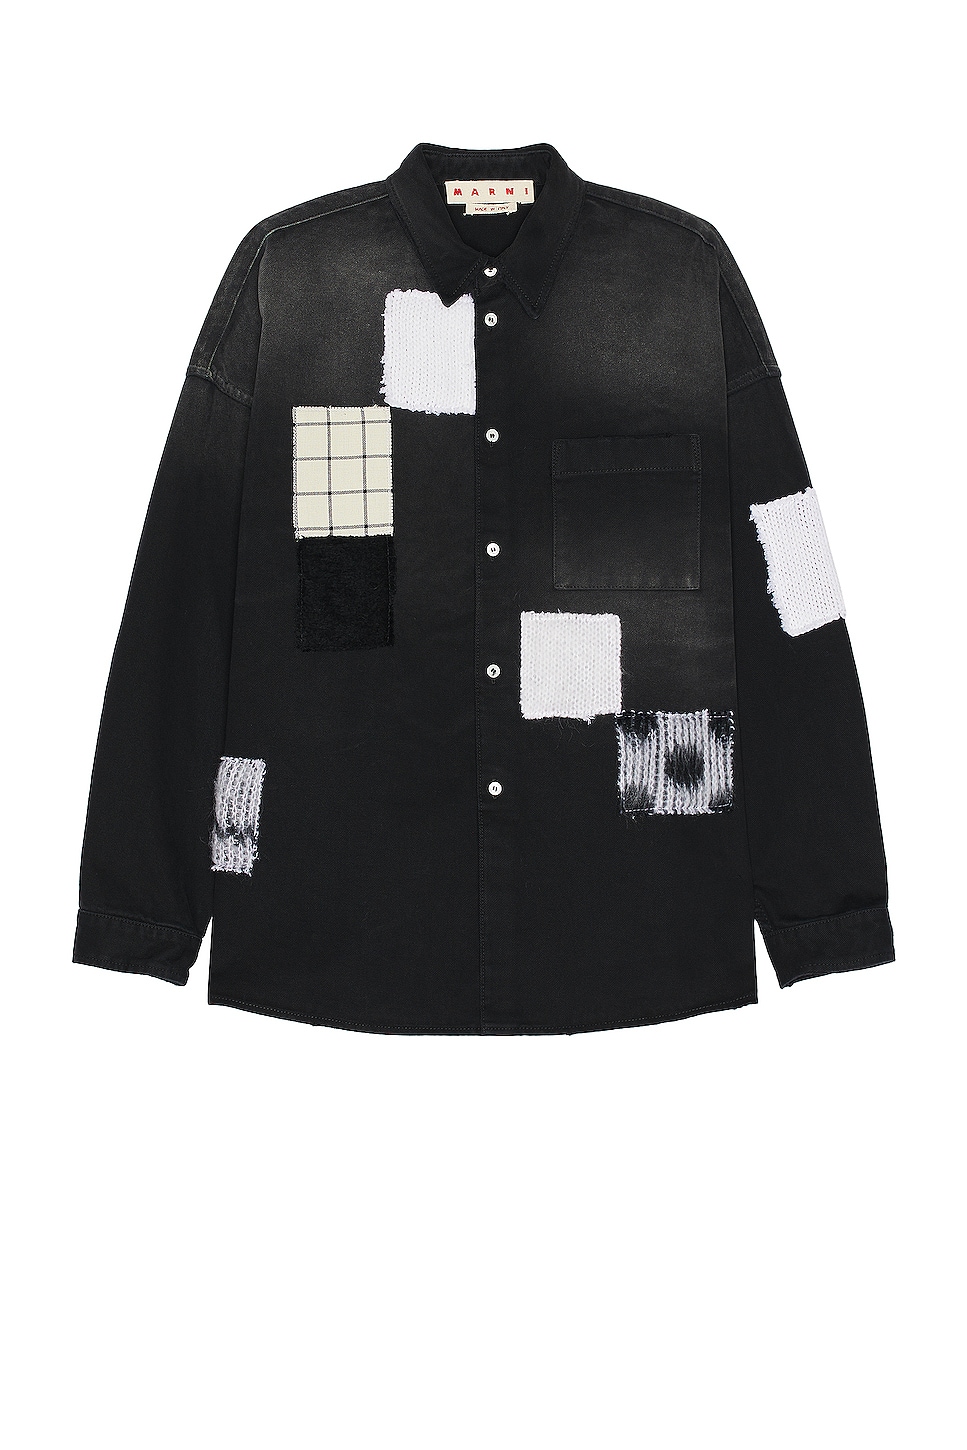 Image 1 of Marni Patchwork Shirt in Black